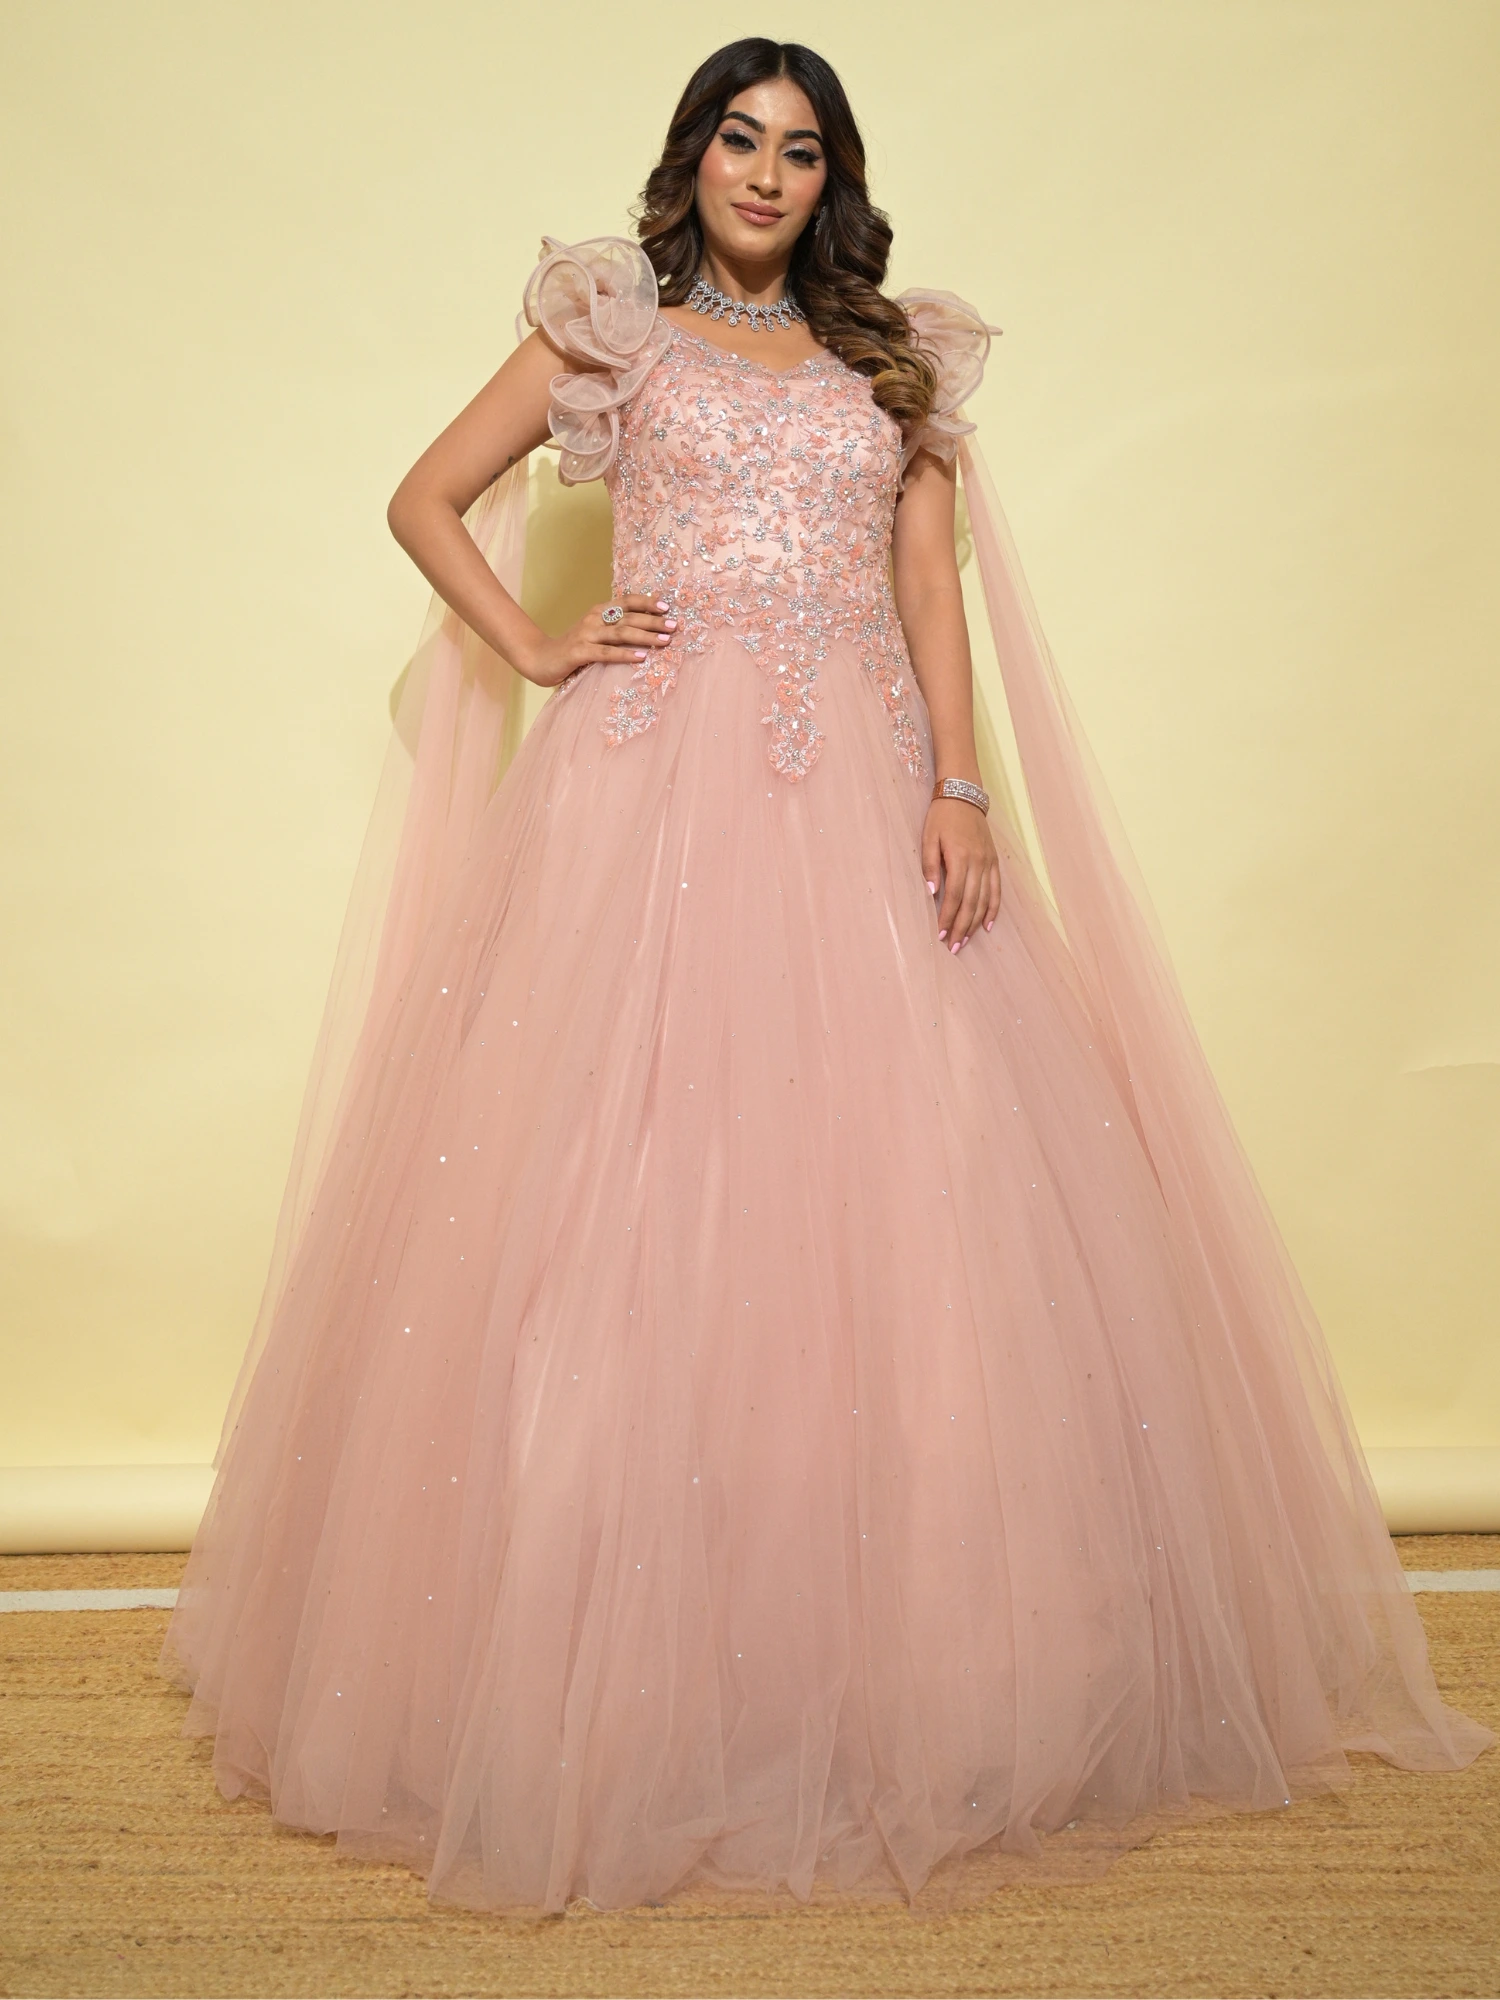 Beautiful long peach and green ball gown | Ball gowns fantasy, Ball gowns,  Ball dresses